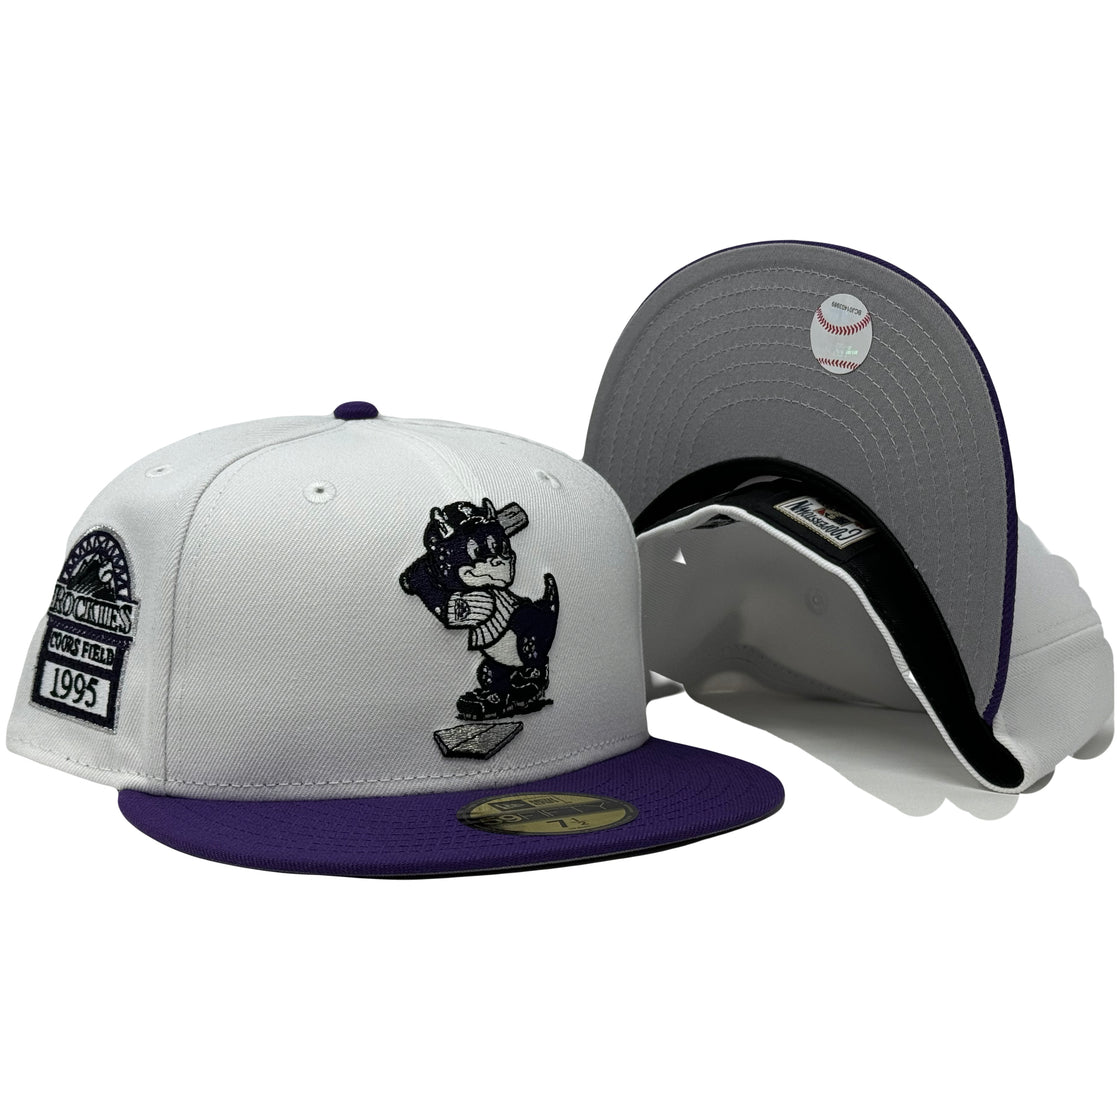 Colorado Rockies Mascot Logo 1995 Coors Field New Era Fitted Hat